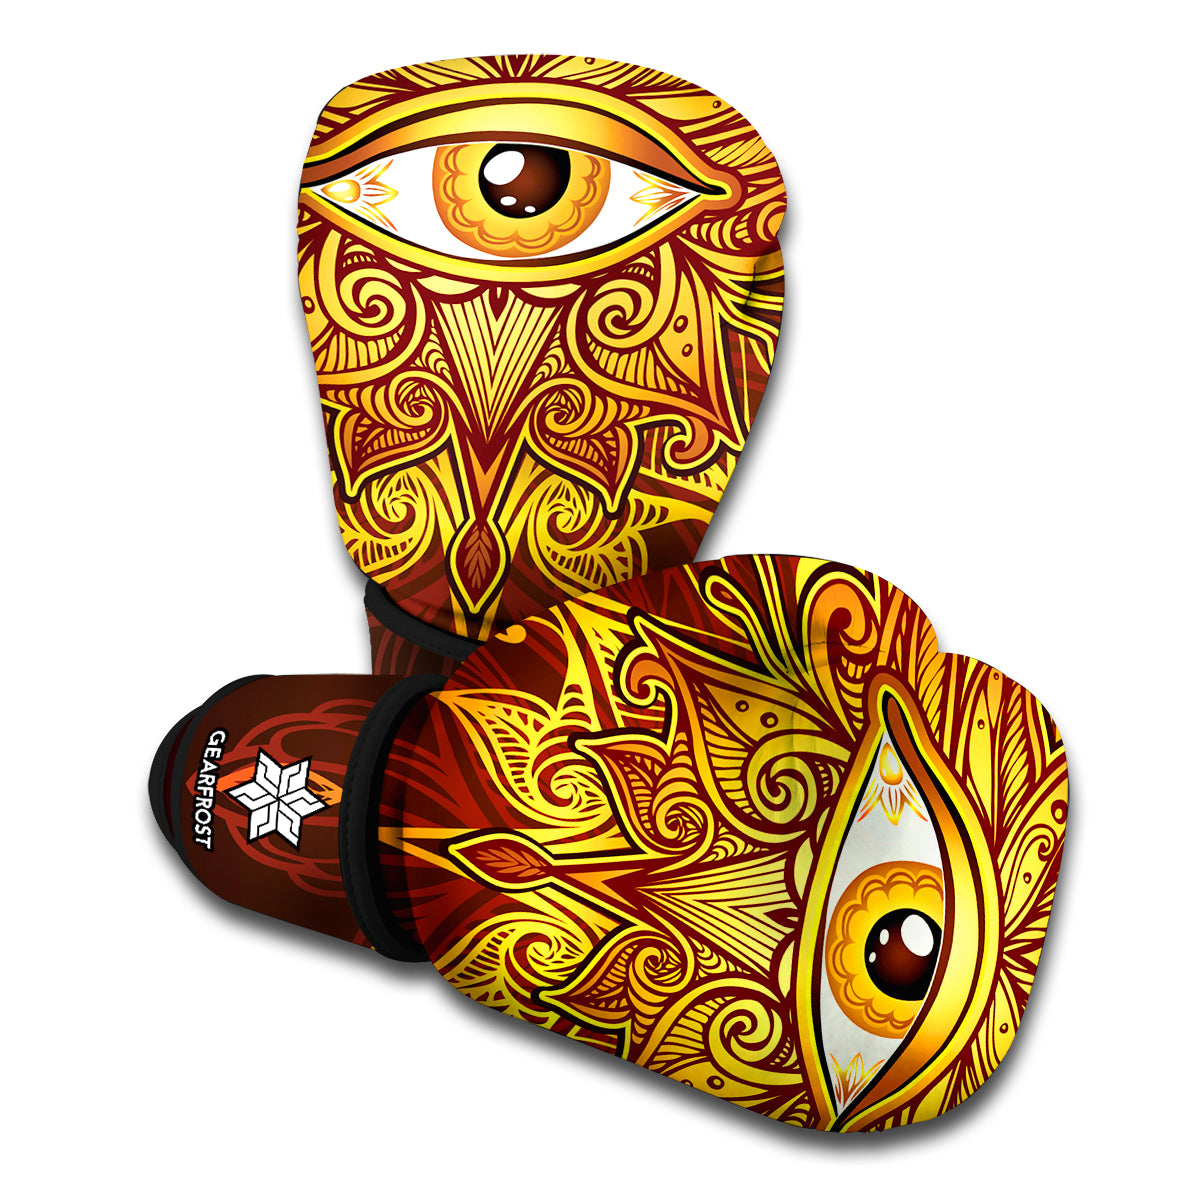 Gold All Seeing Eye Print Boxing Gloves